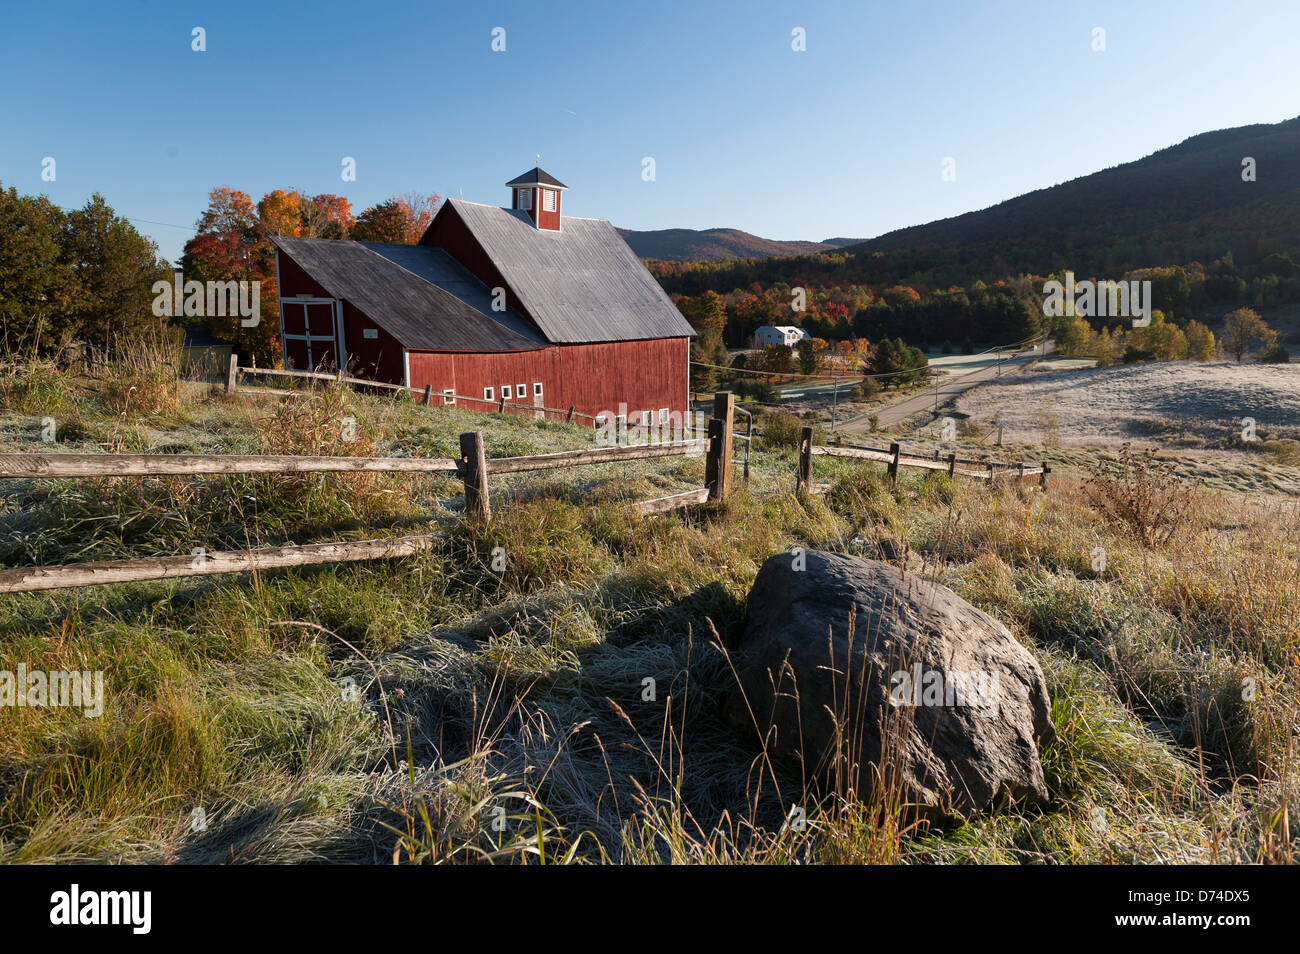 USA, Vermont, Stowe, Red barn during fall foliage Stock Photo